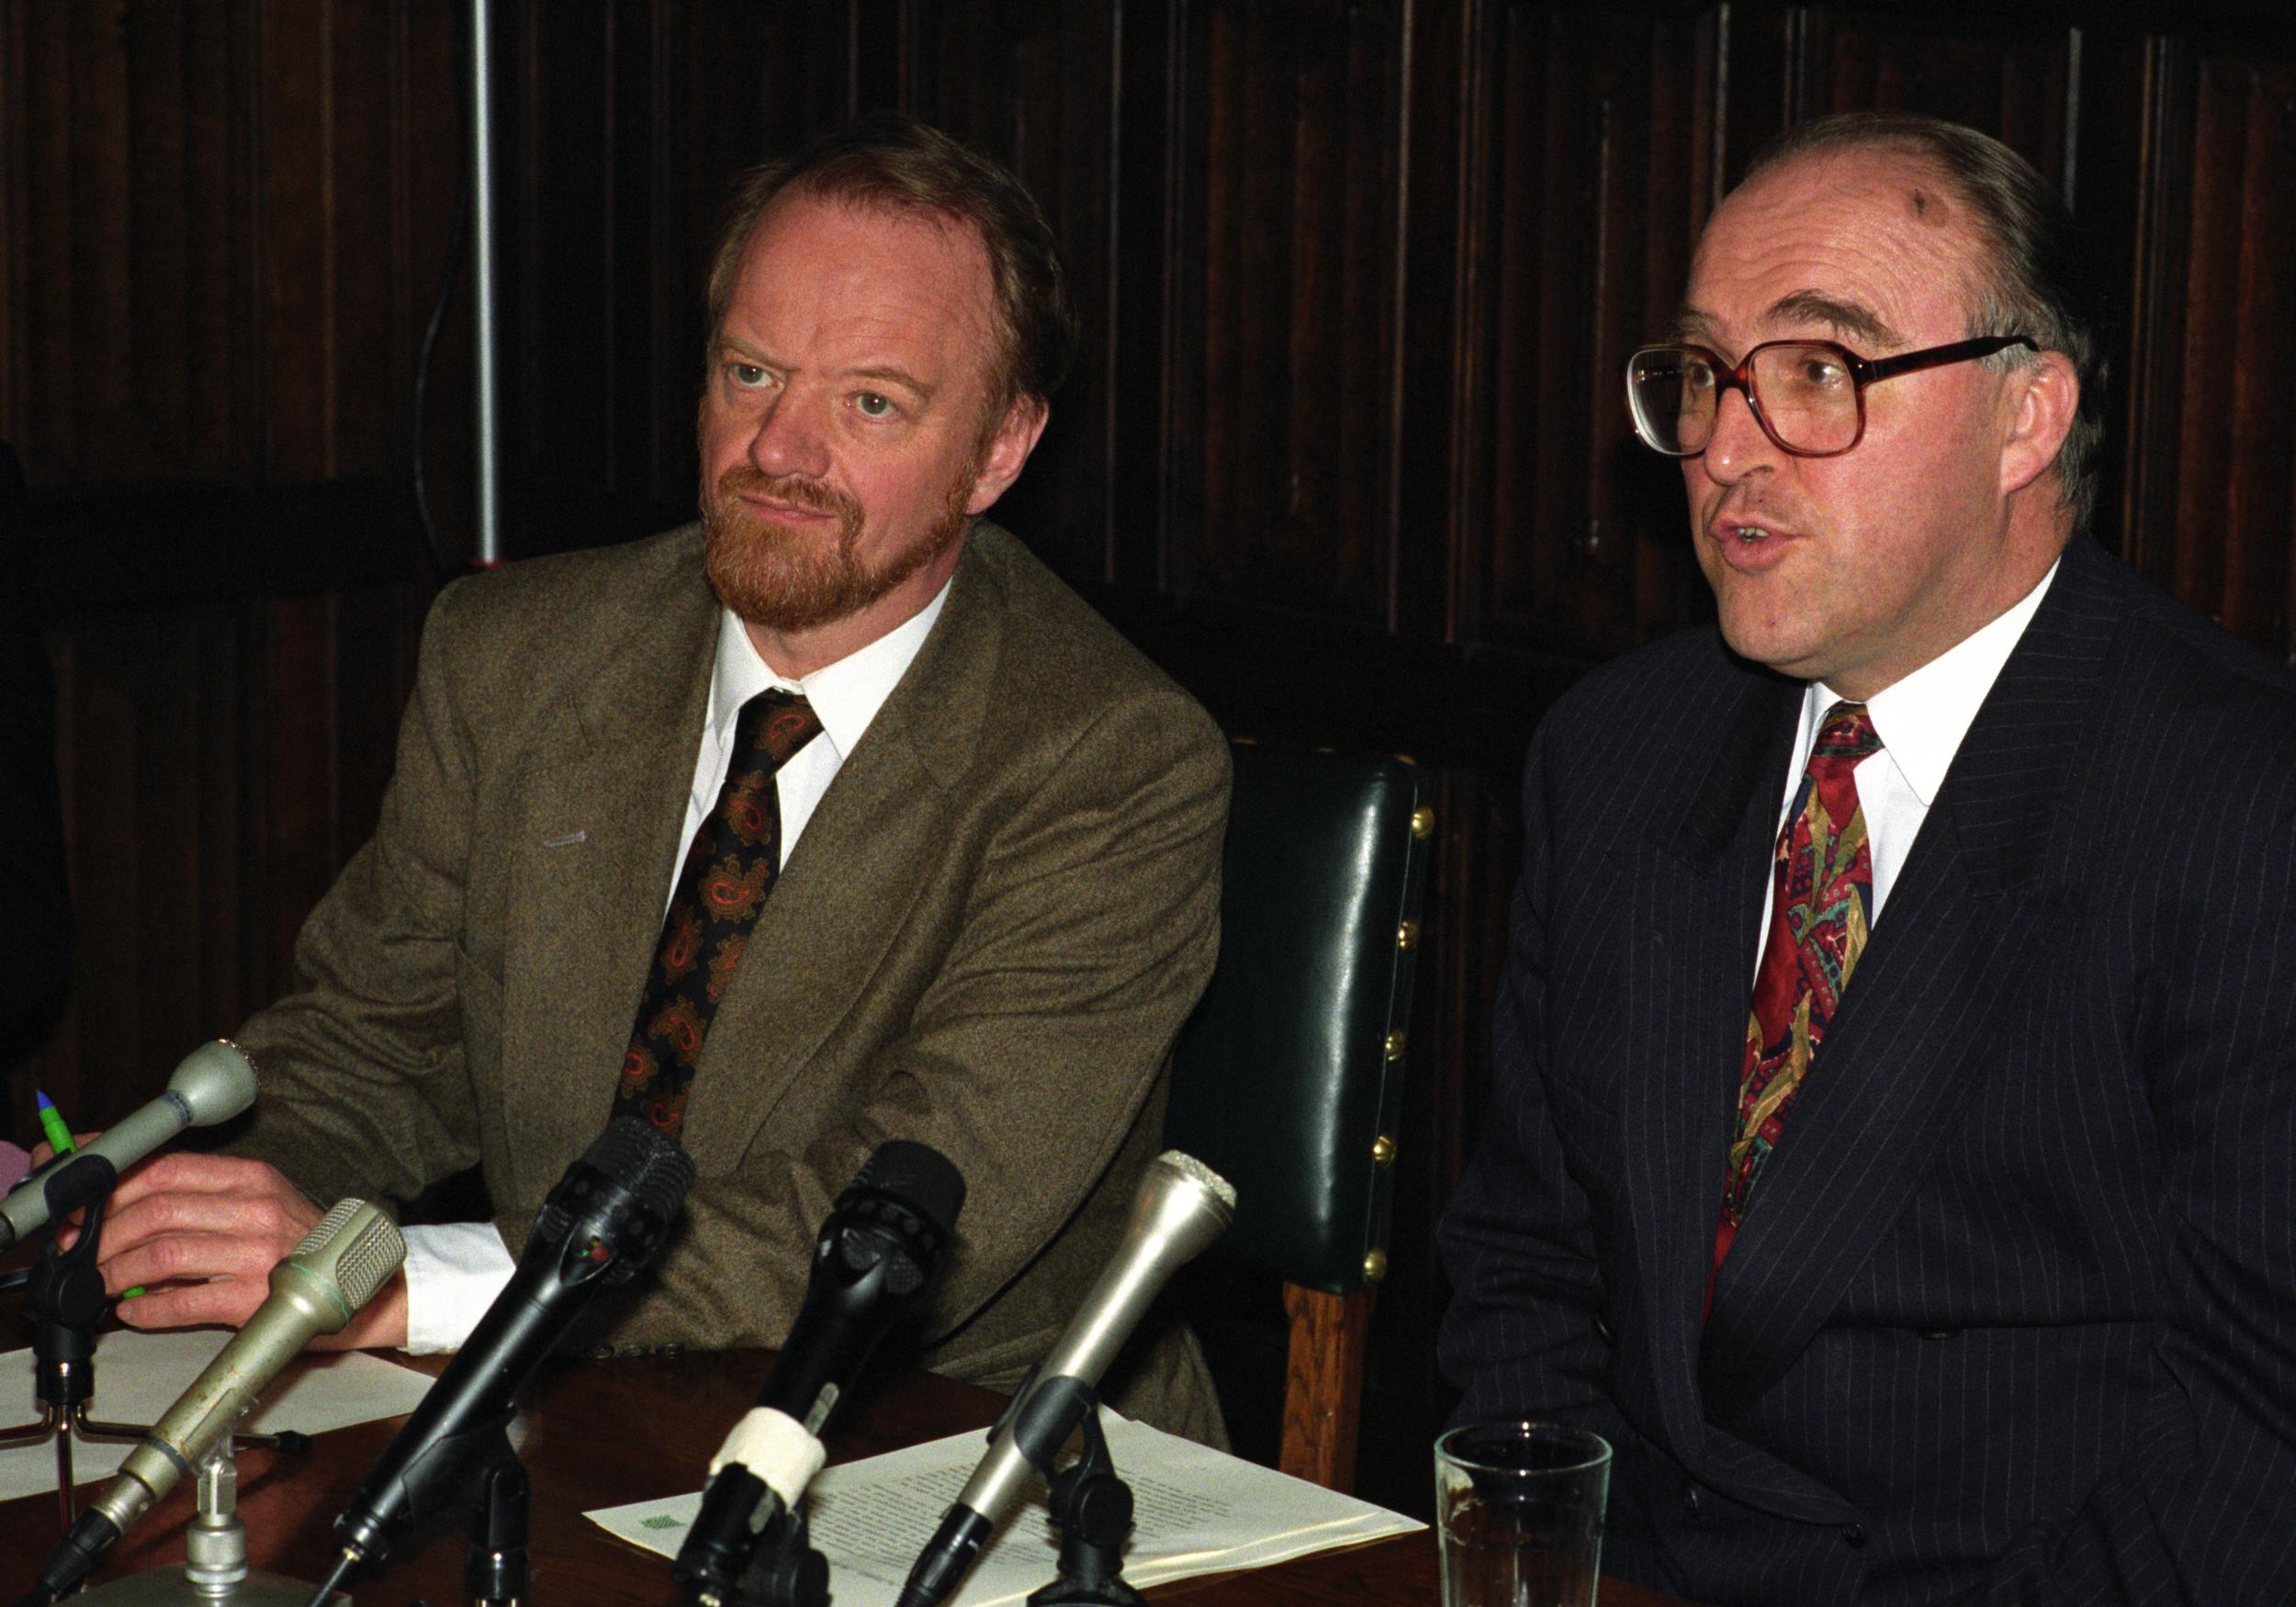 With Robin Cook in 1992